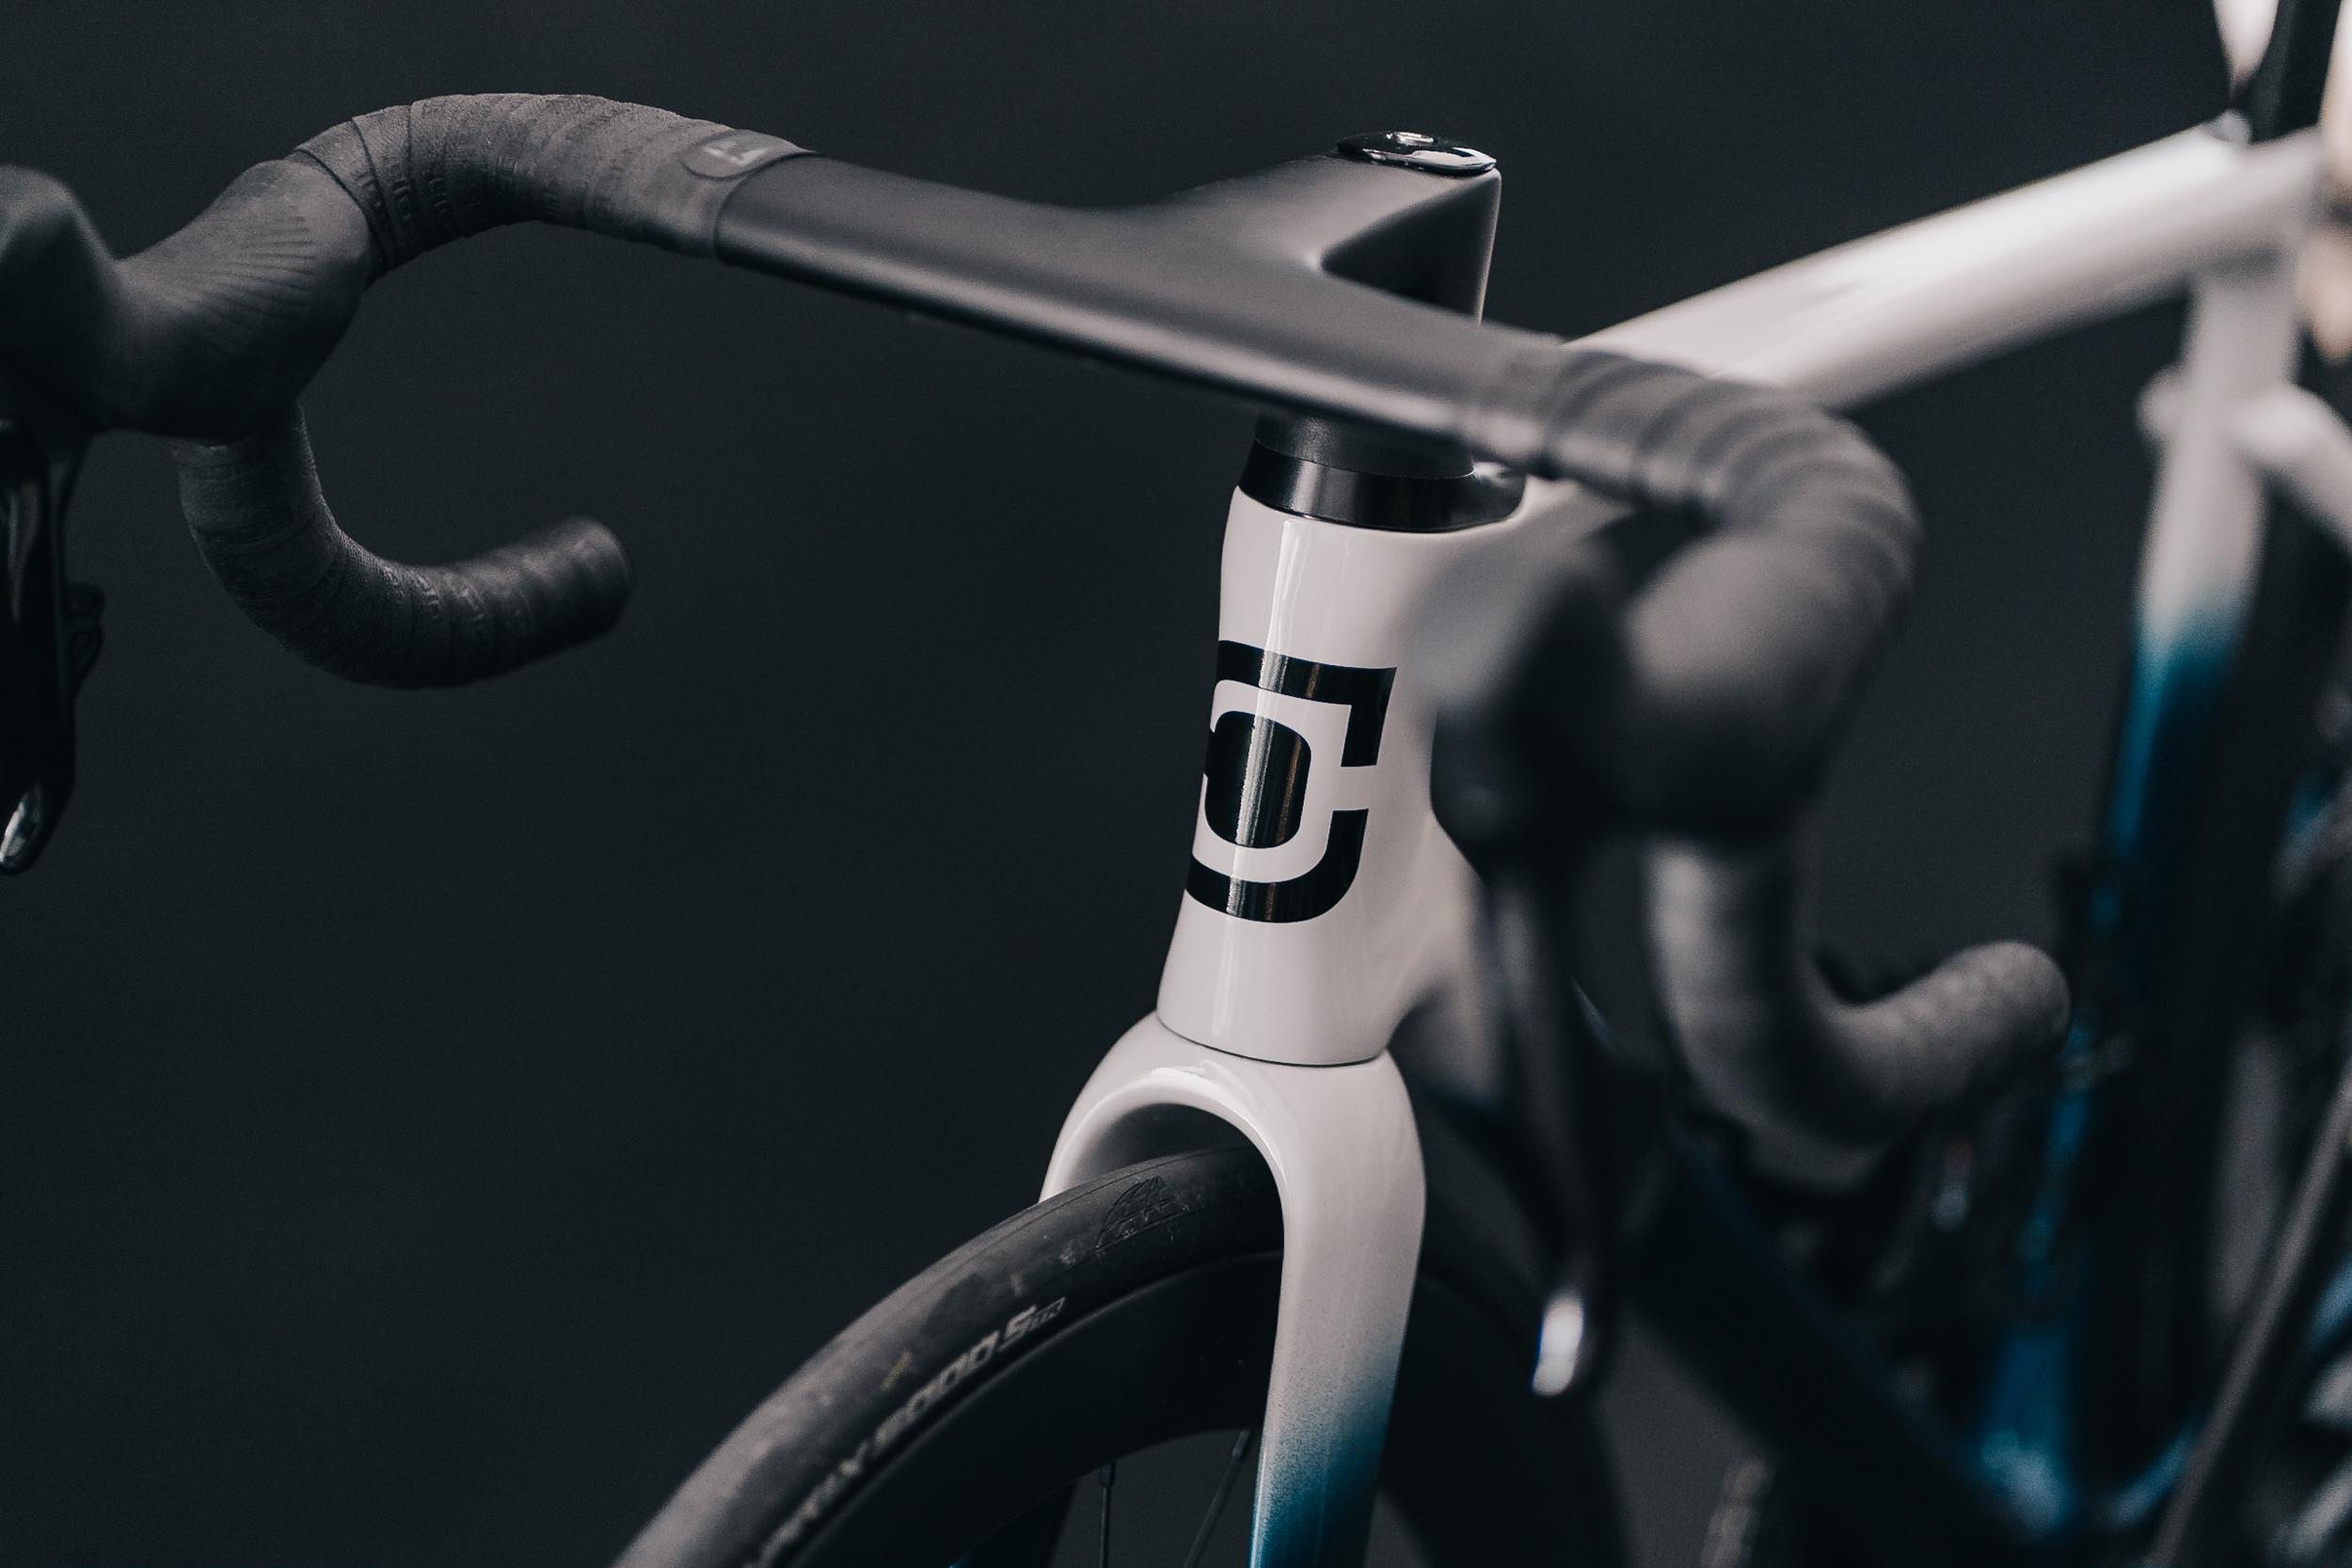 Choose CS Bikes for a complete package of cutting-edge technology, superior craftsmanship, and personalized fit. Don't compromise on quality or style—unleash the full potential of your ride with our Carbon finishing kit.